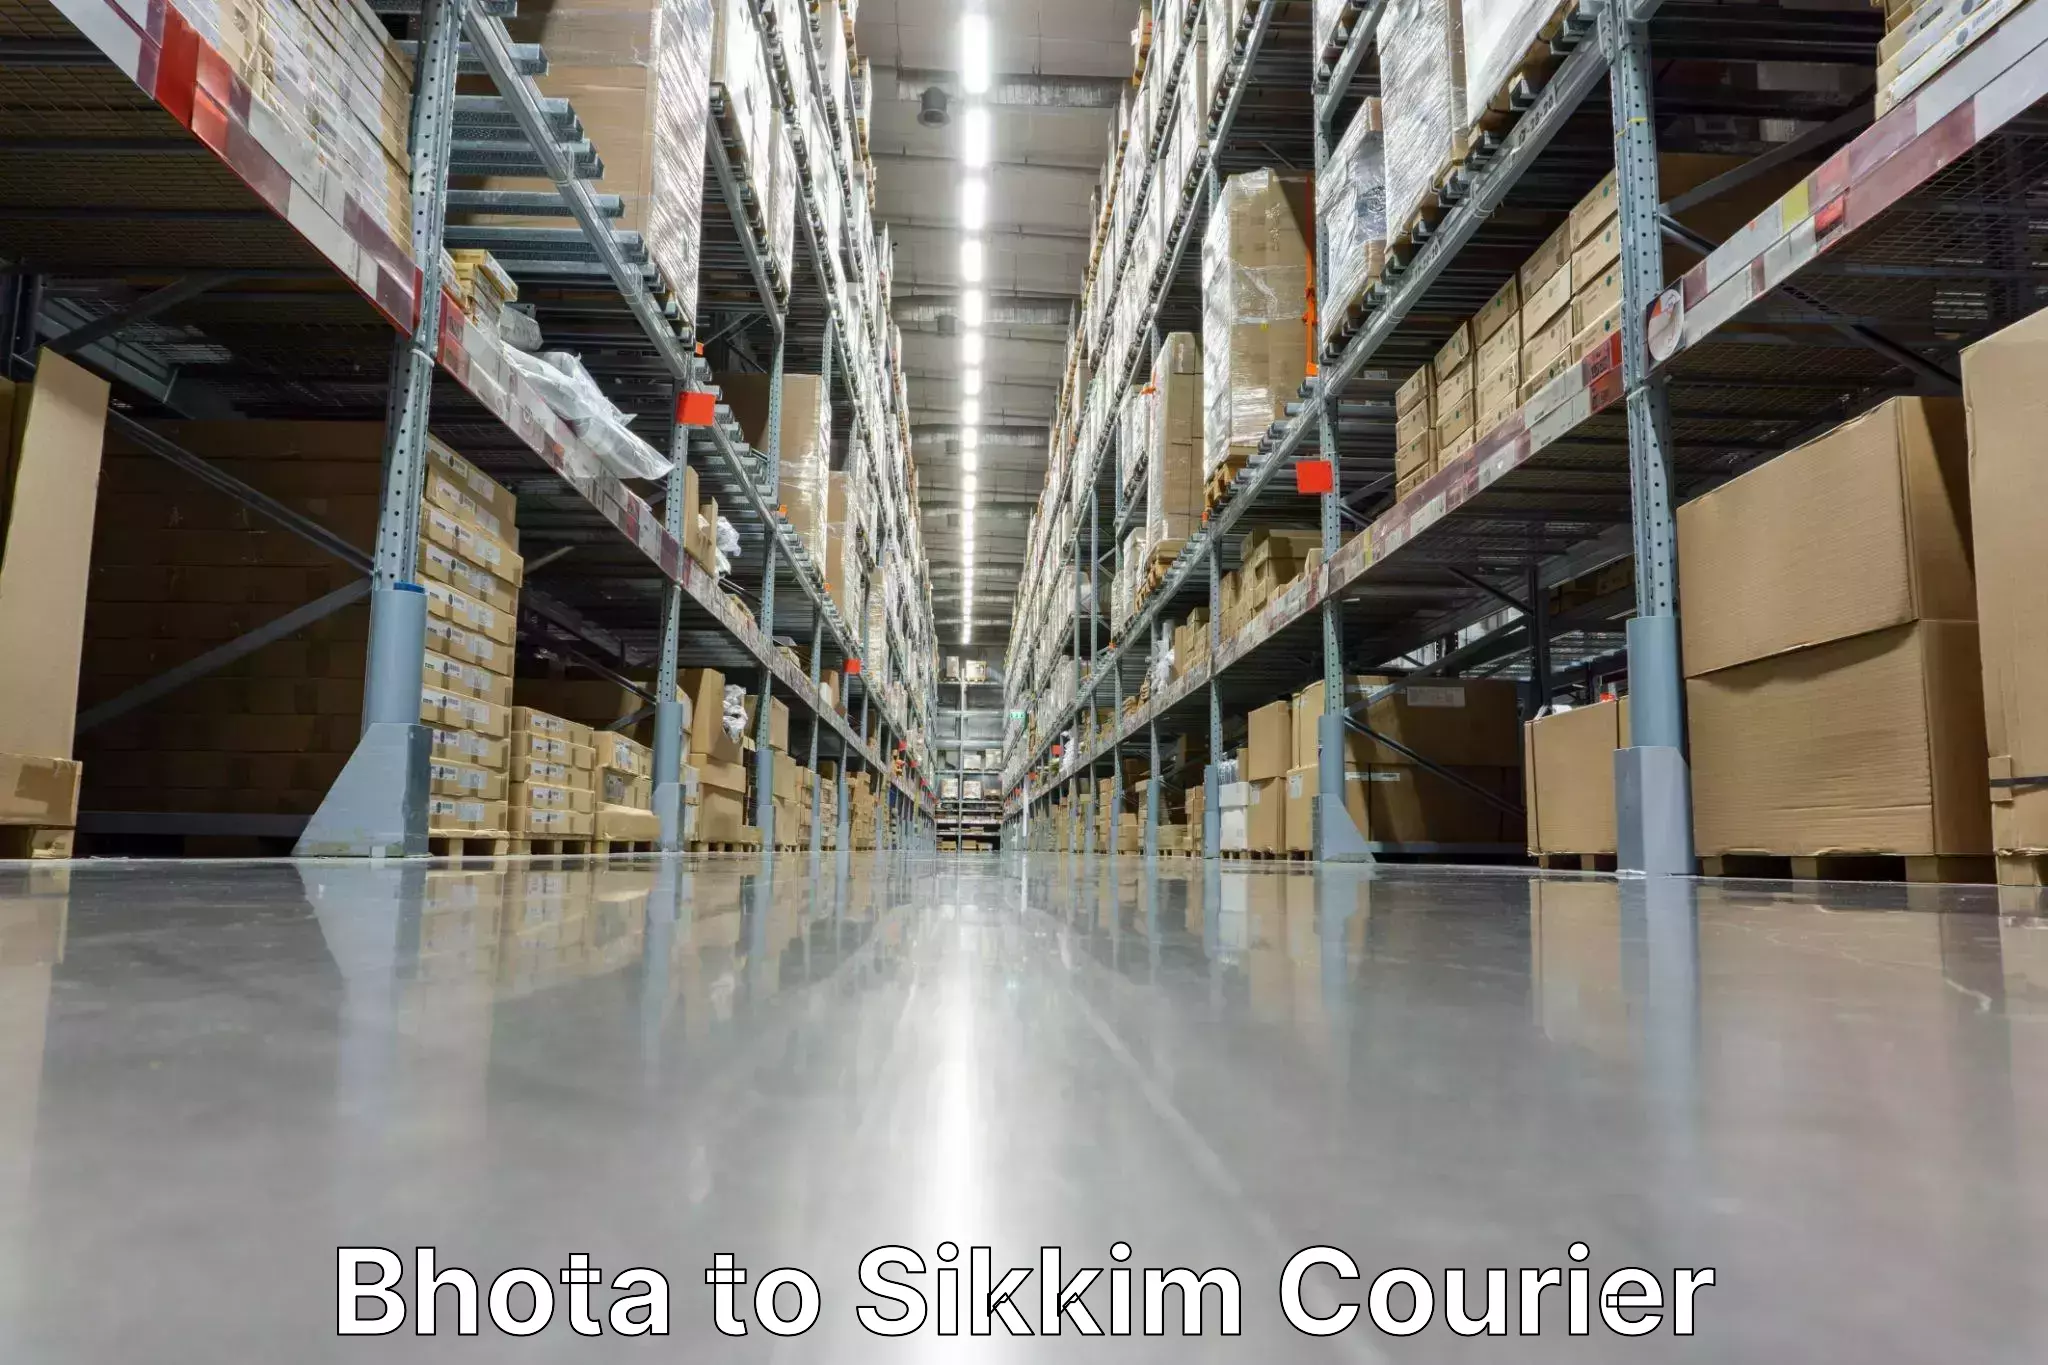 Global shipping solutions Bhota to Pelling